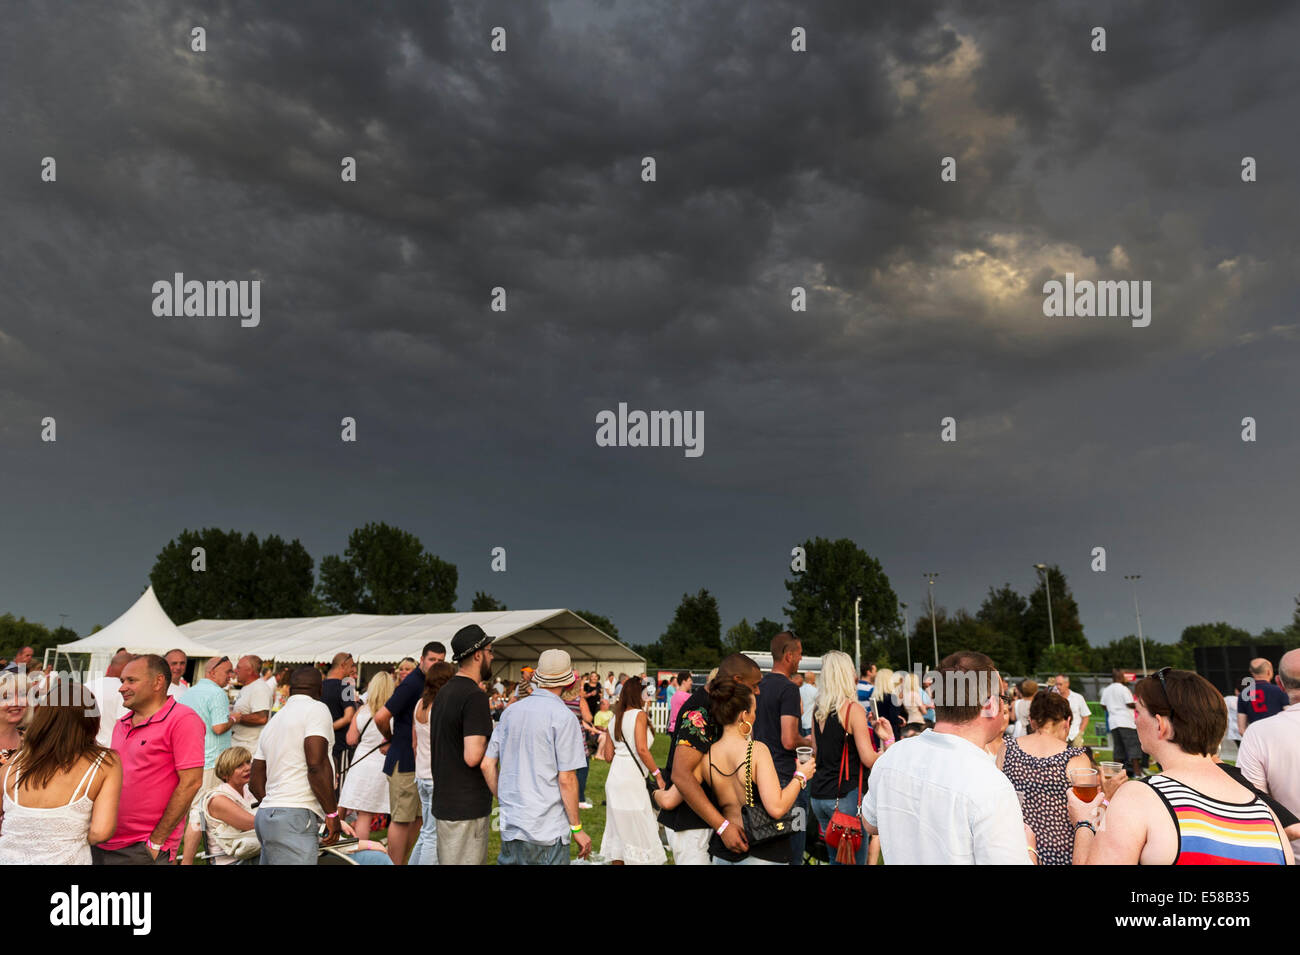 Bad weather approaching the Brentwood Festival. Stock Photo